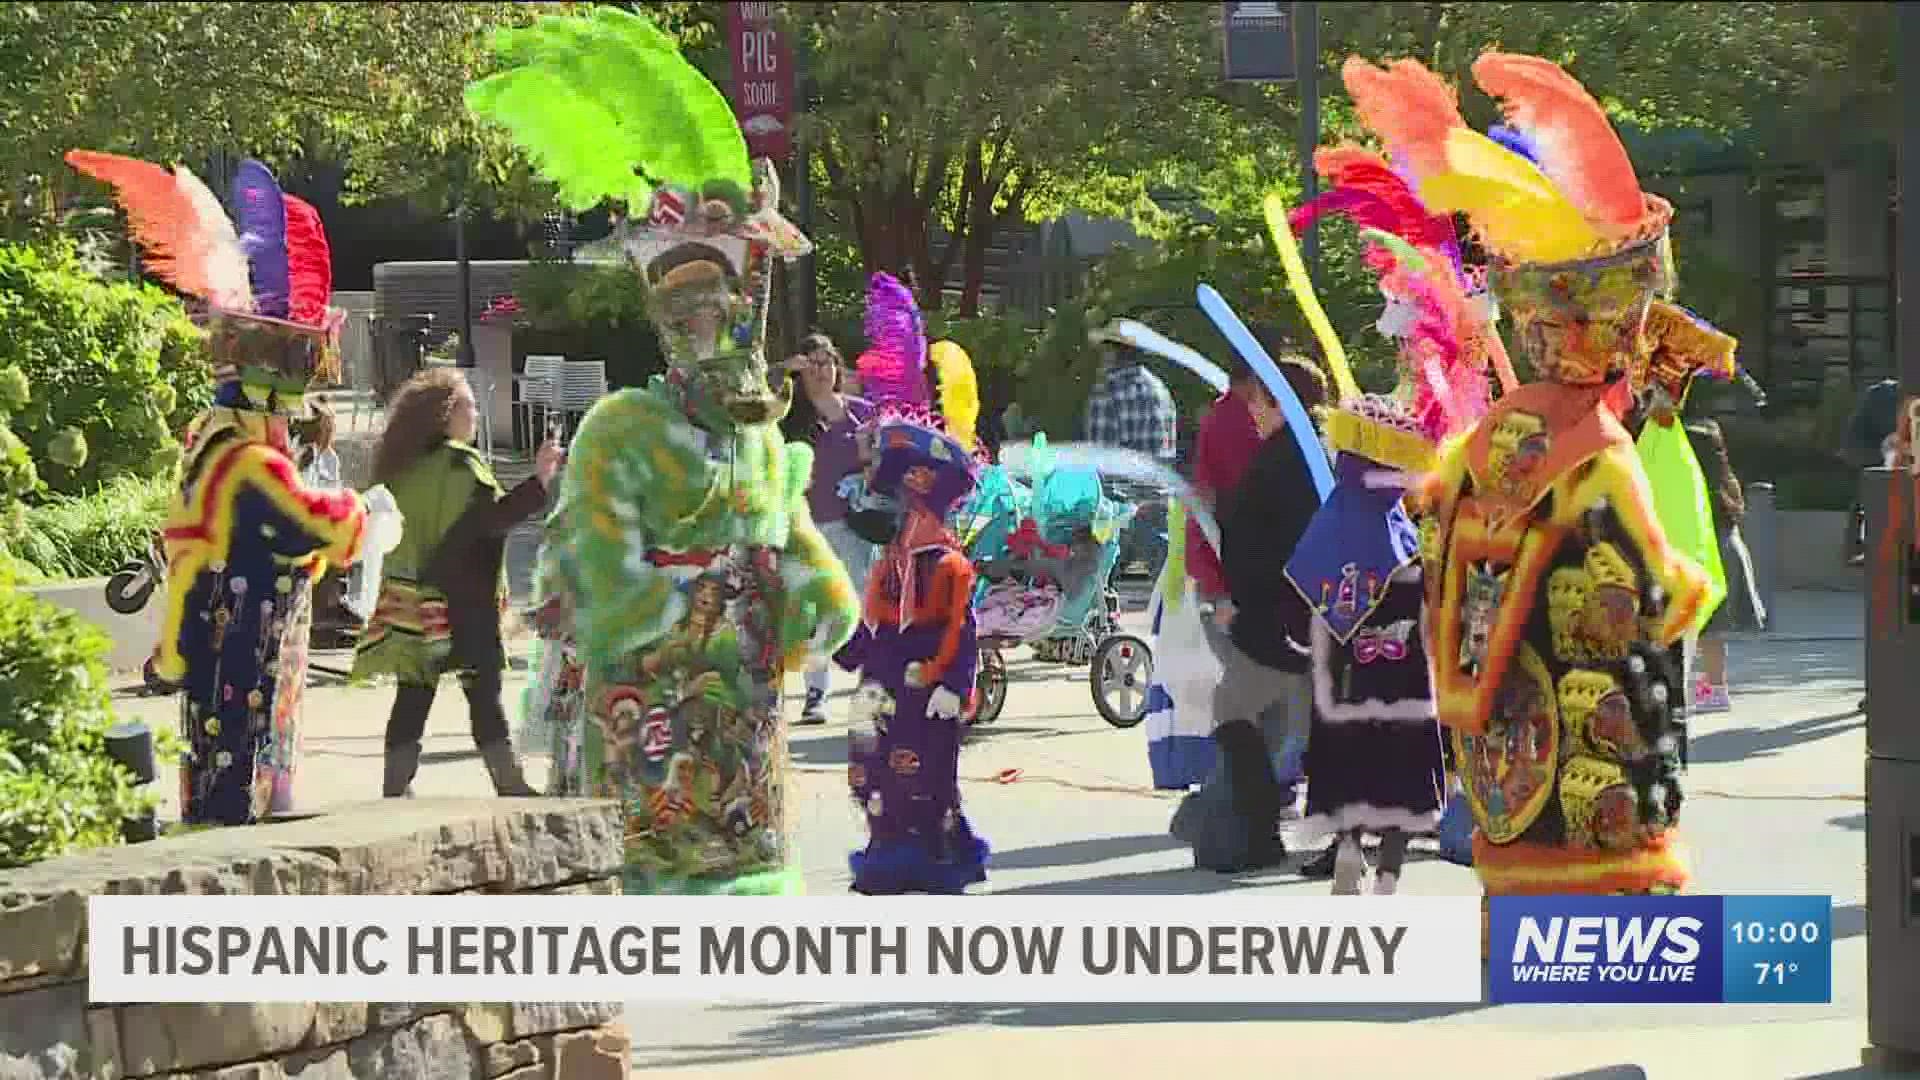 Many local businesses and organizations have kicked off Hispanic Heritage Month with celebrations.